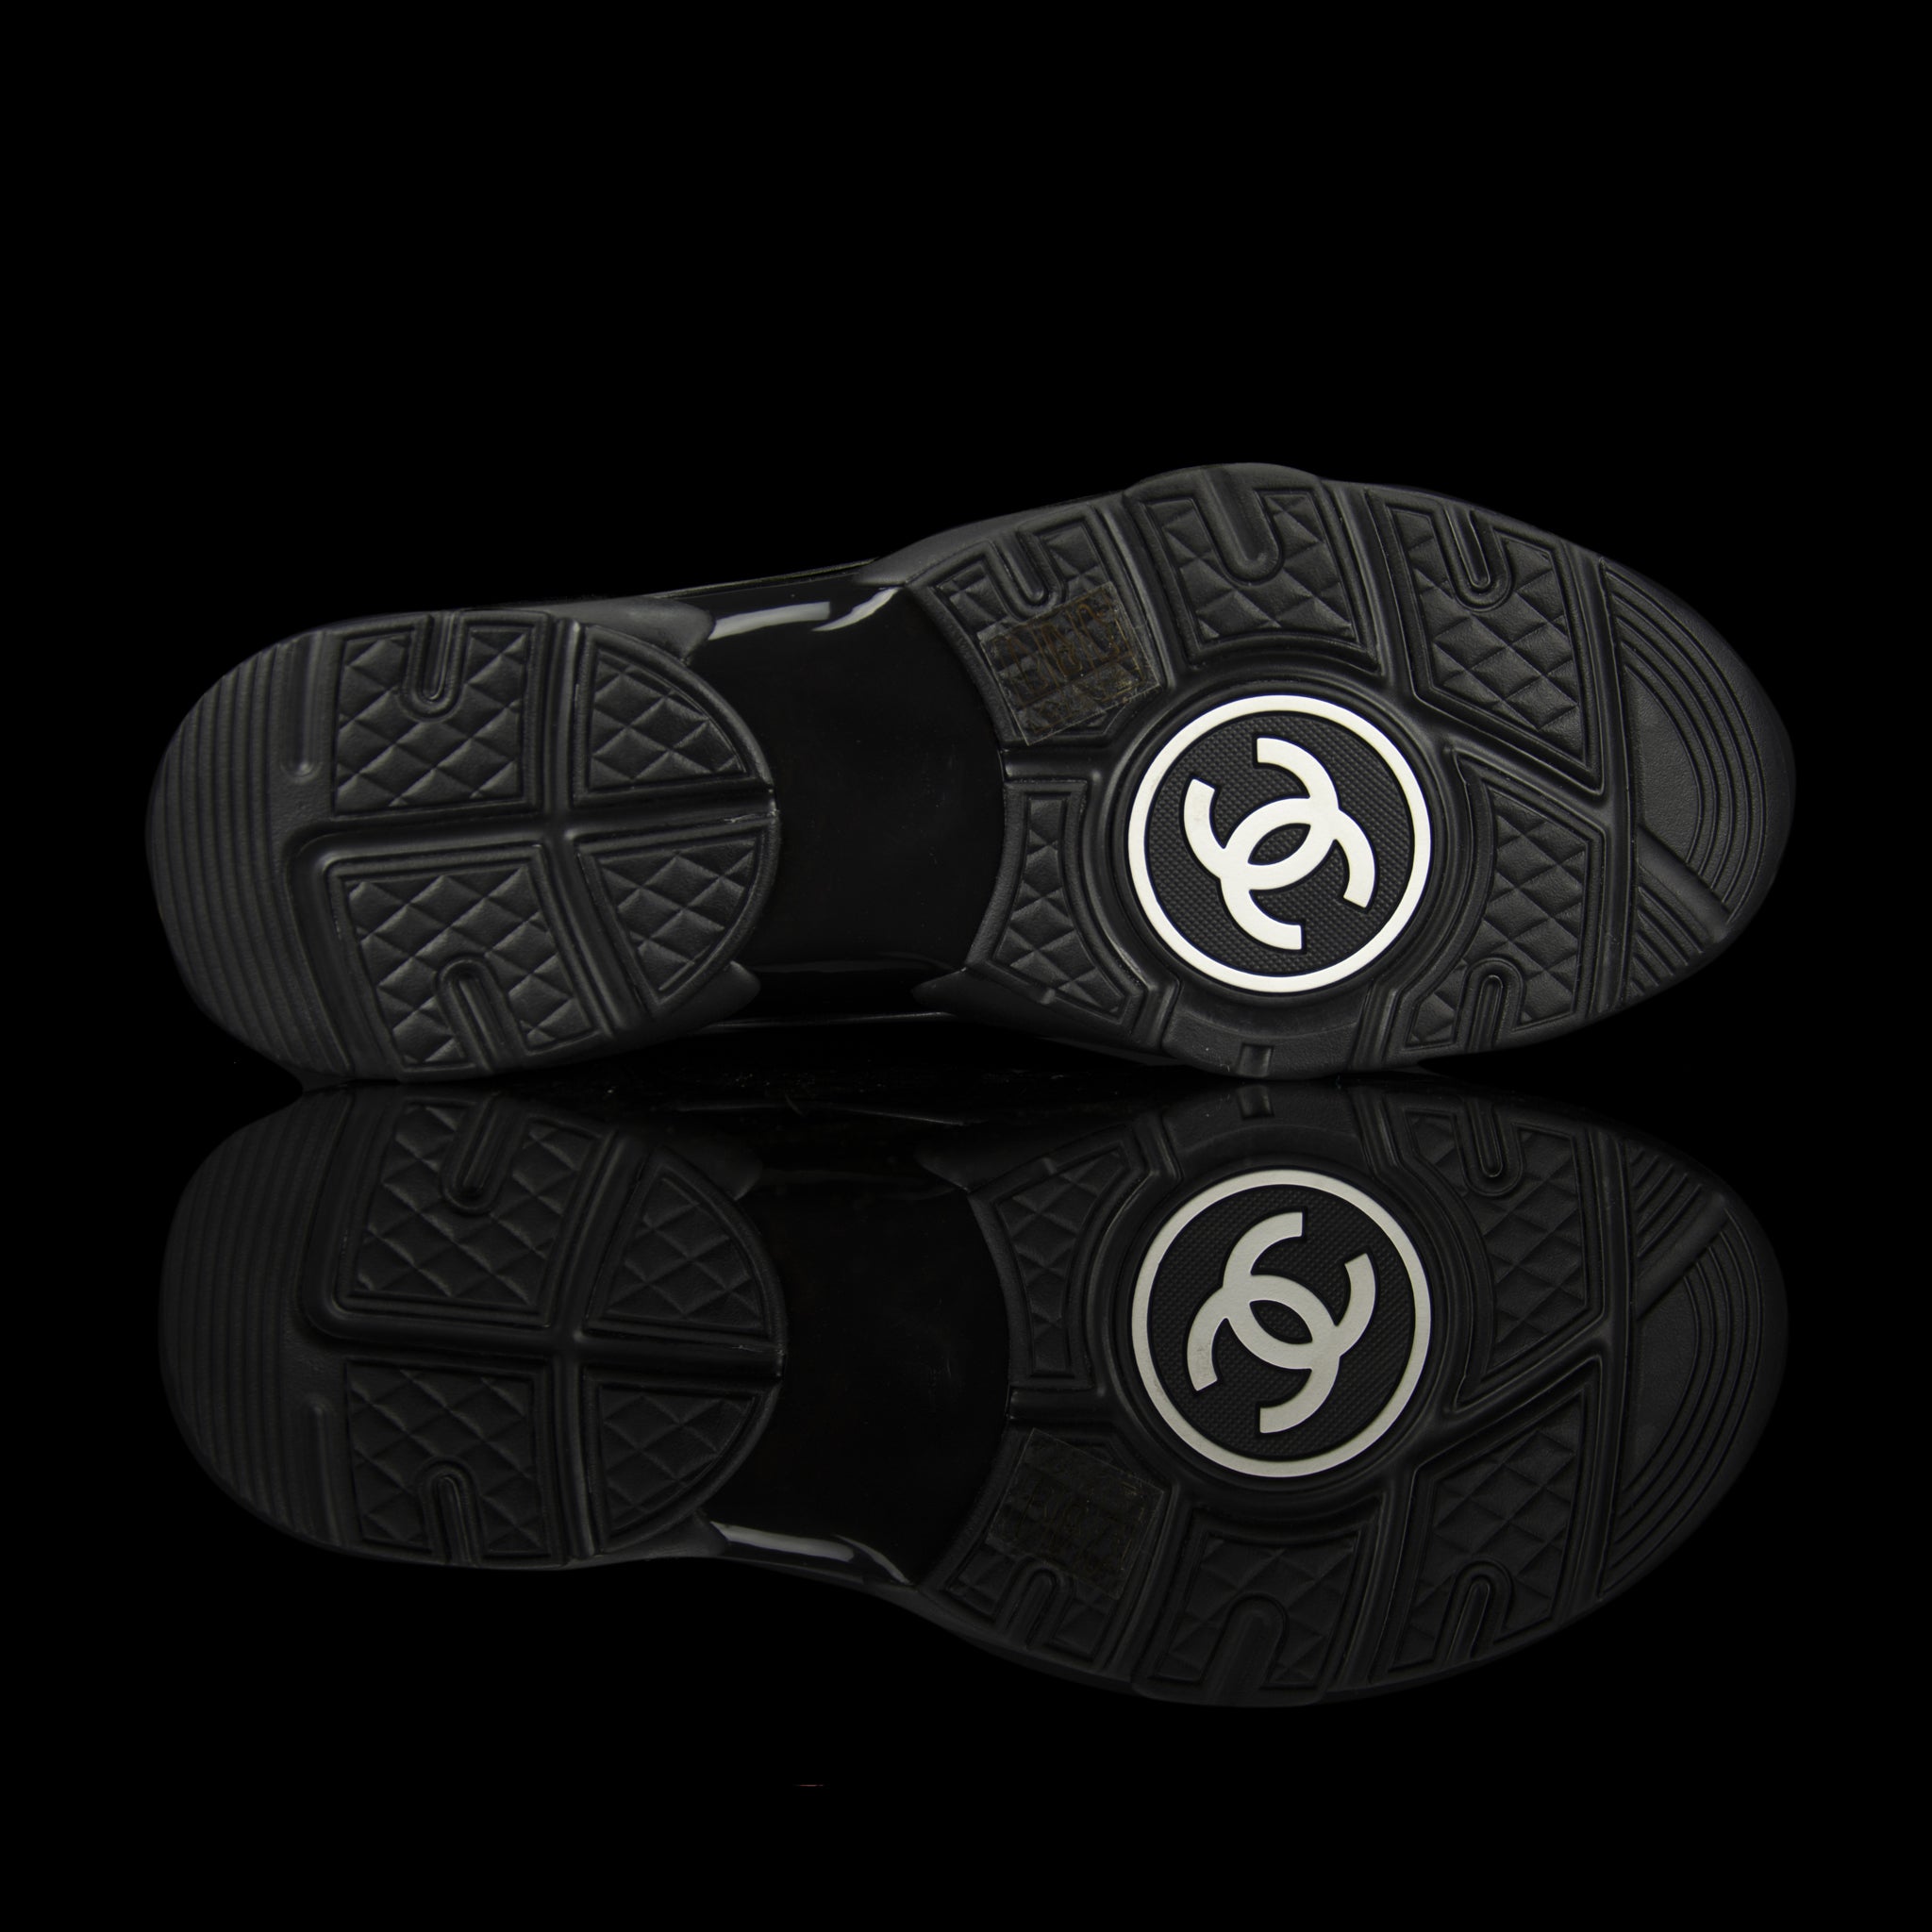 Chanel-CC Sneakers-Pre Order Duration (3-5 Working Days) CC Logo on side Black Mesh Toe Box, Mesh Sides, Reflective Panels Rubber Sole 2018 Release Limited Stock-fabriqe.com